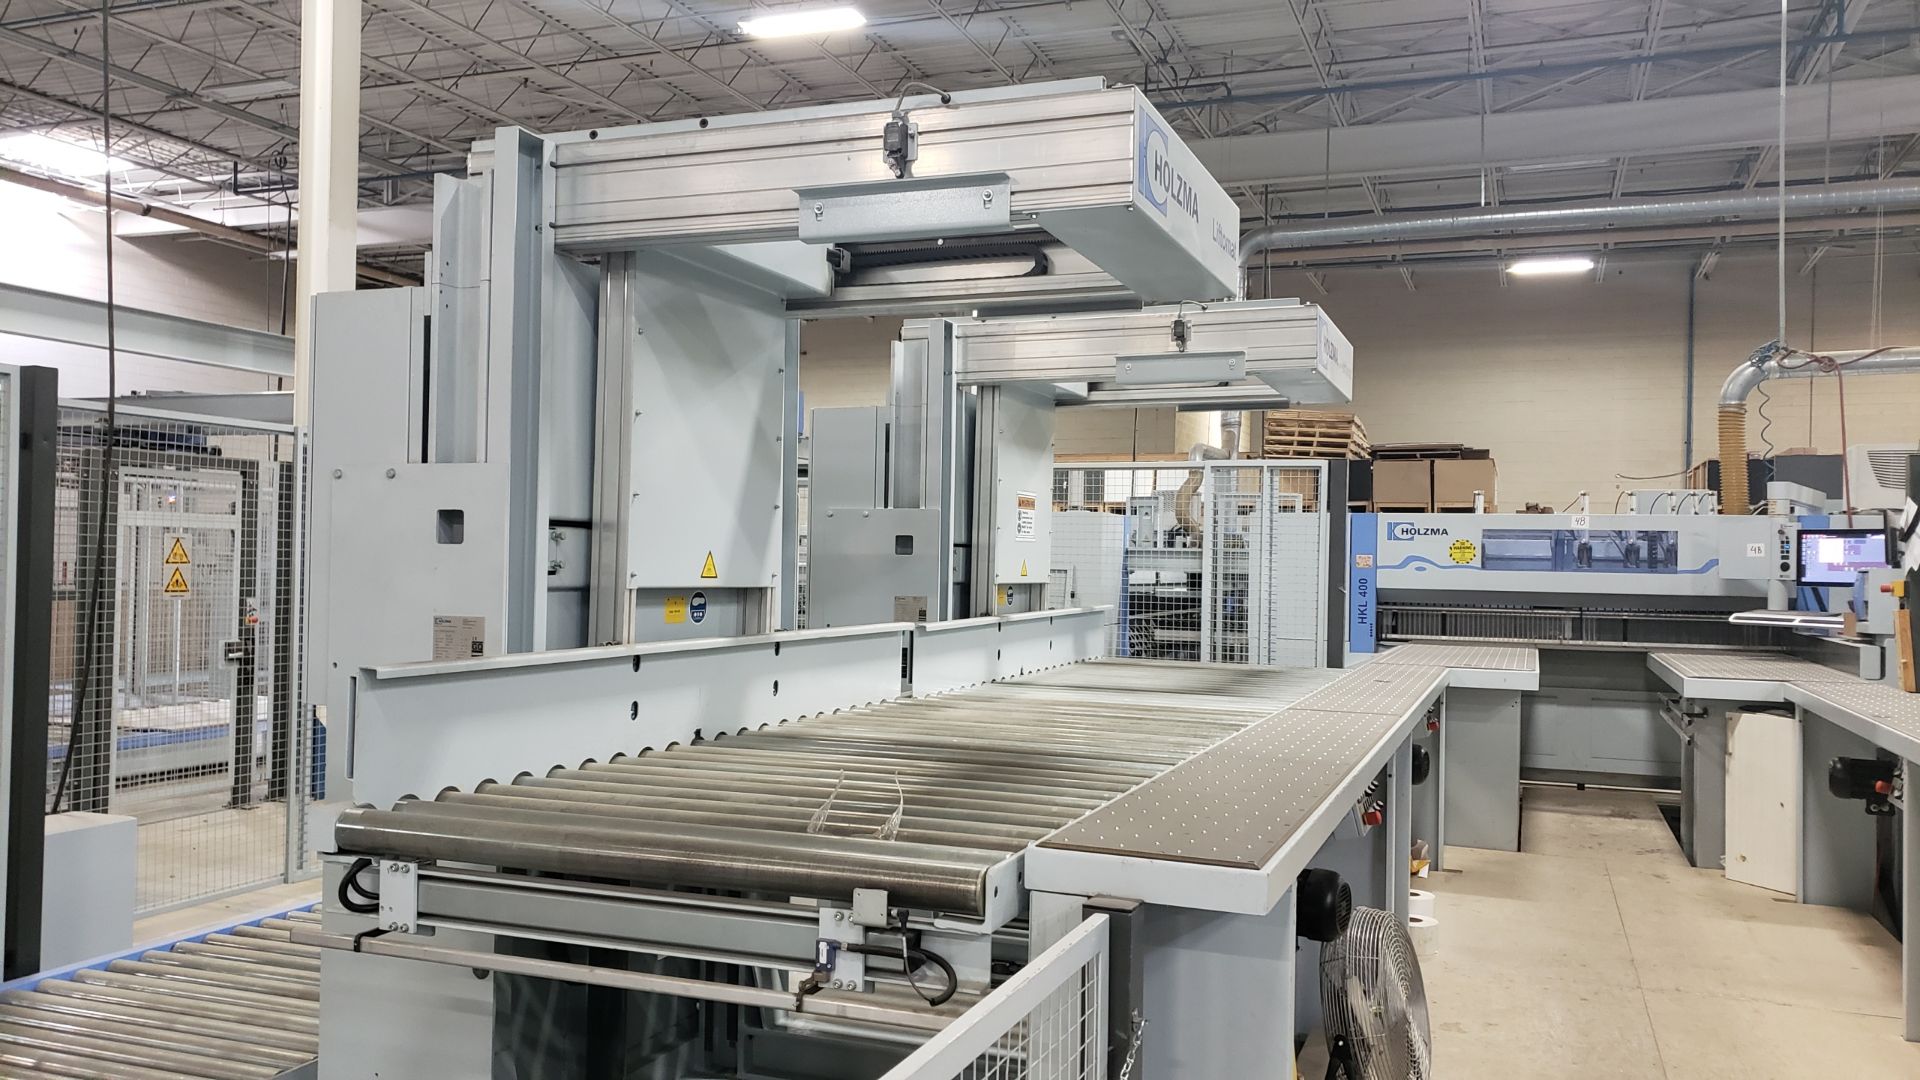 BULK BID - HIGH-CAPACITY STORAGE RETRIEVAL & ANGULAR SAW SYSTEM (NEW COST REPLACEMENT OVER $2.5MM) - - Image 31 of 120